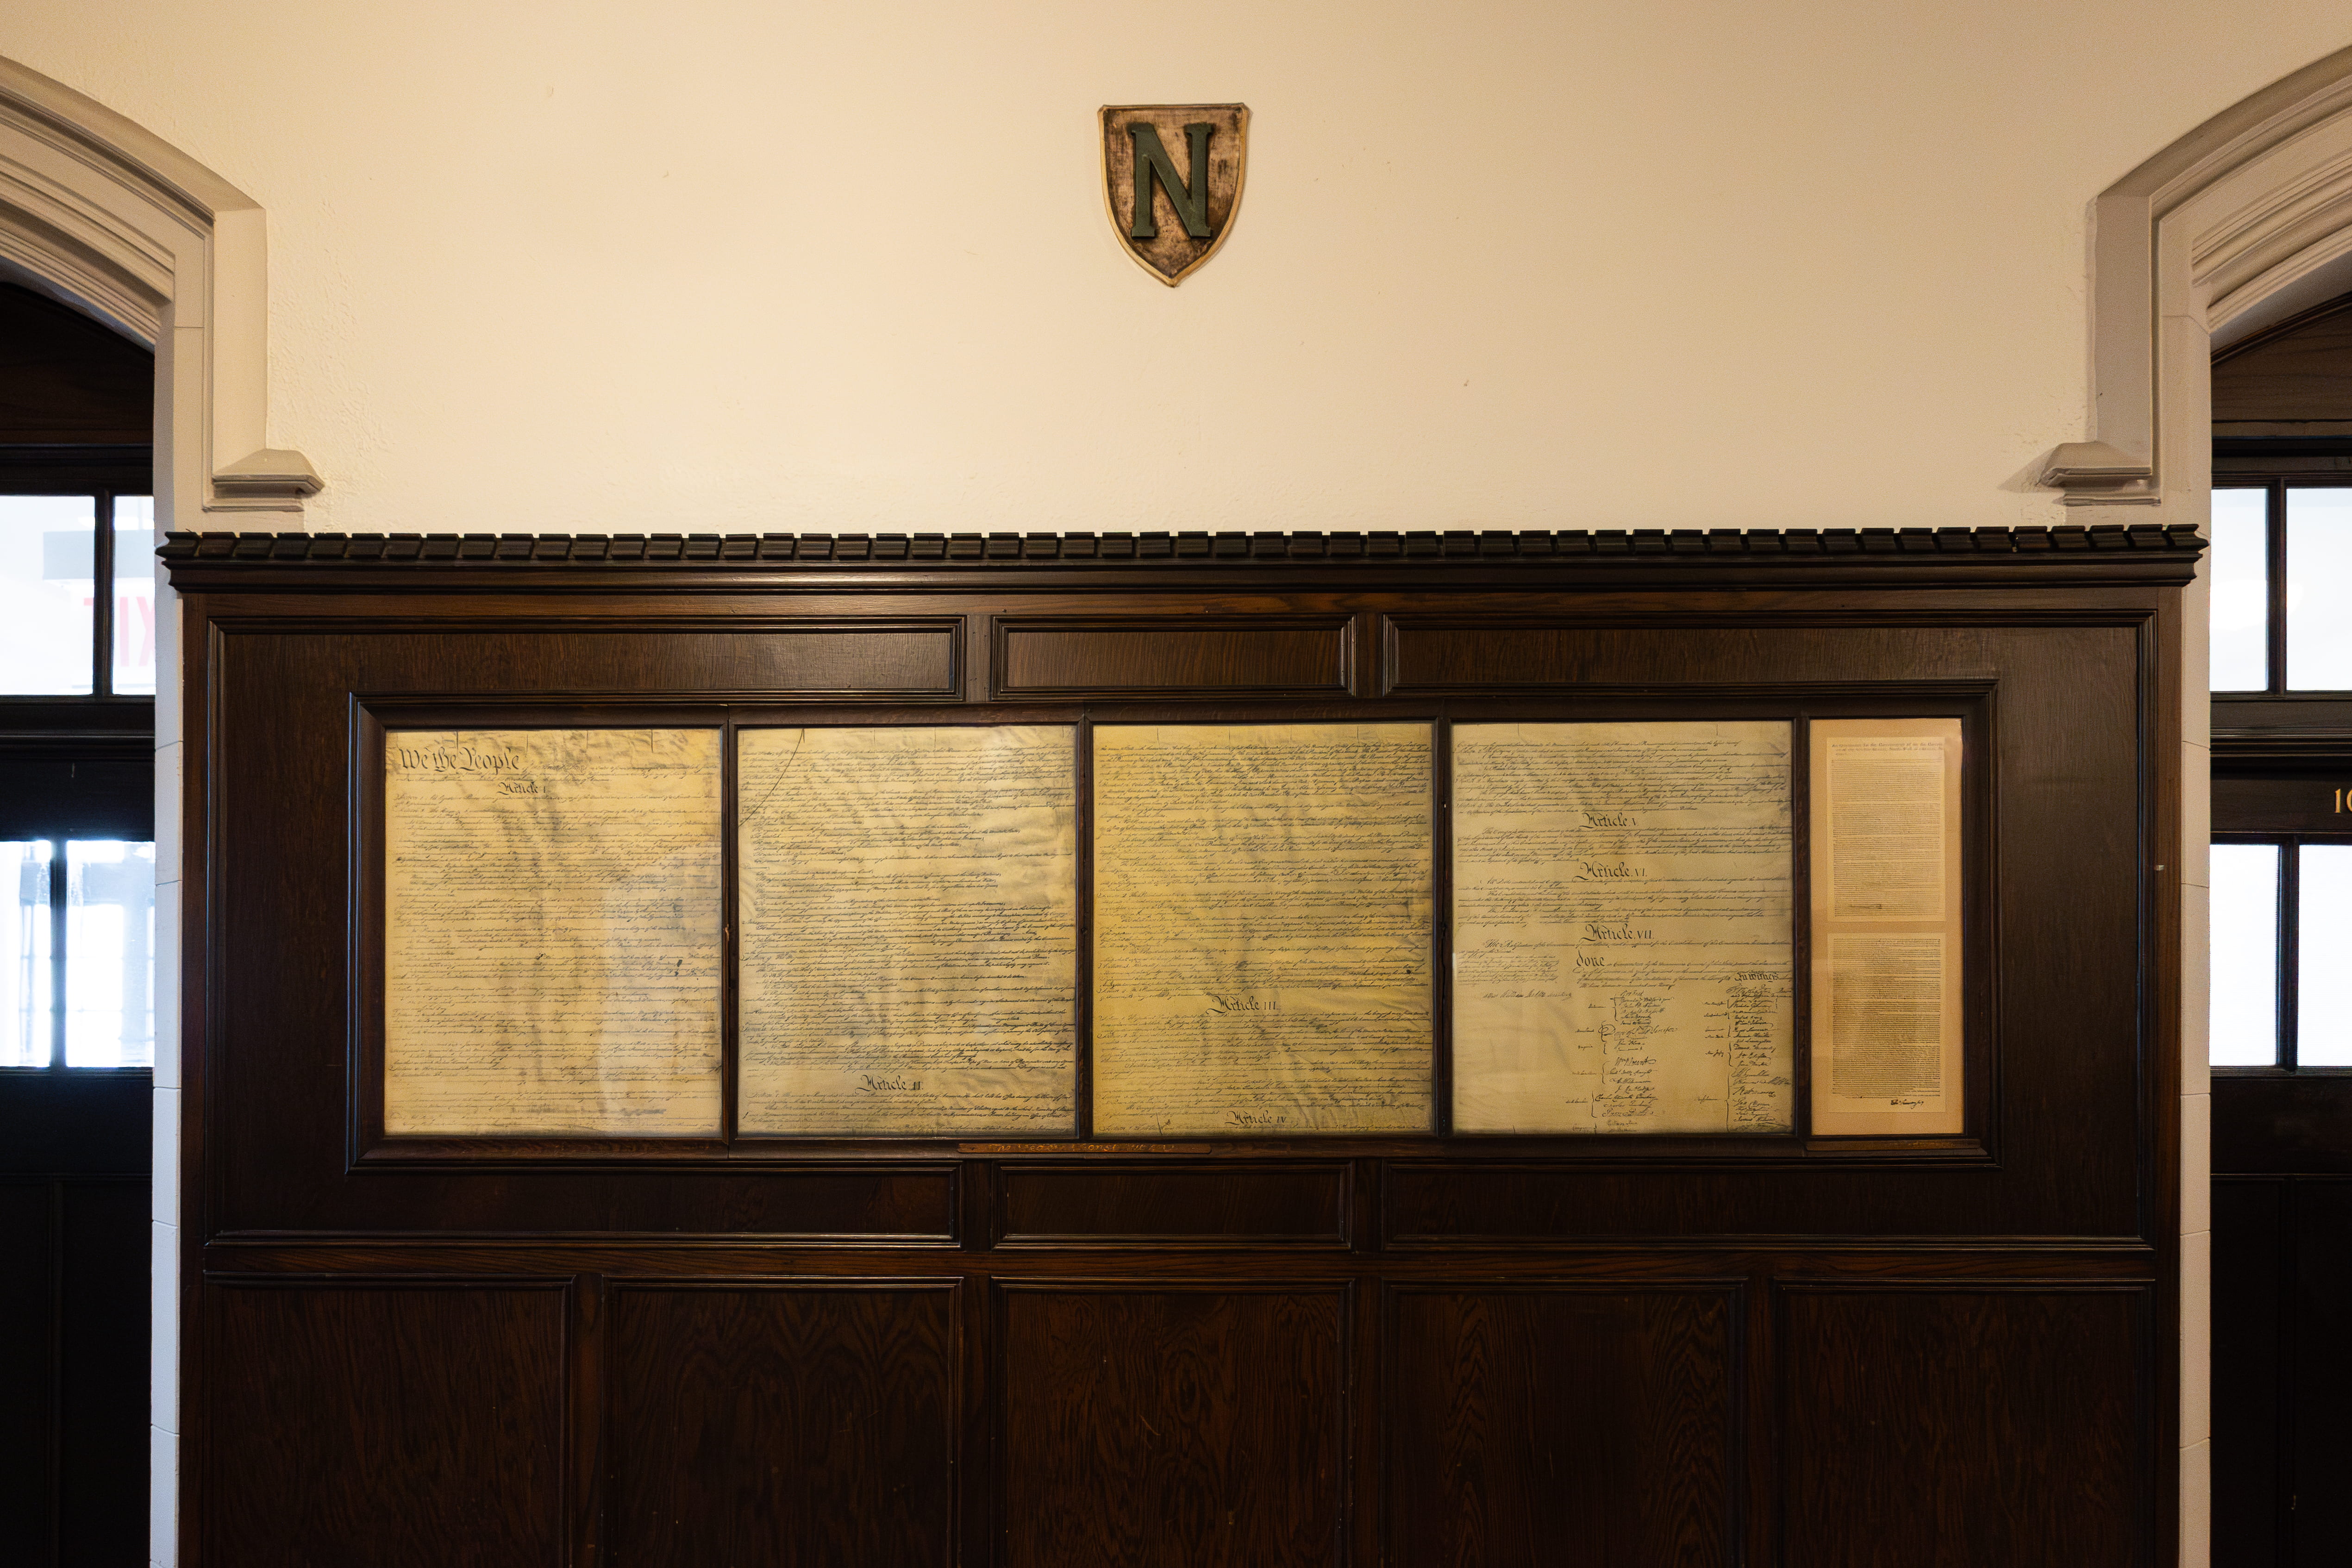 Framed constitutional facsimile stretches across five wall panels